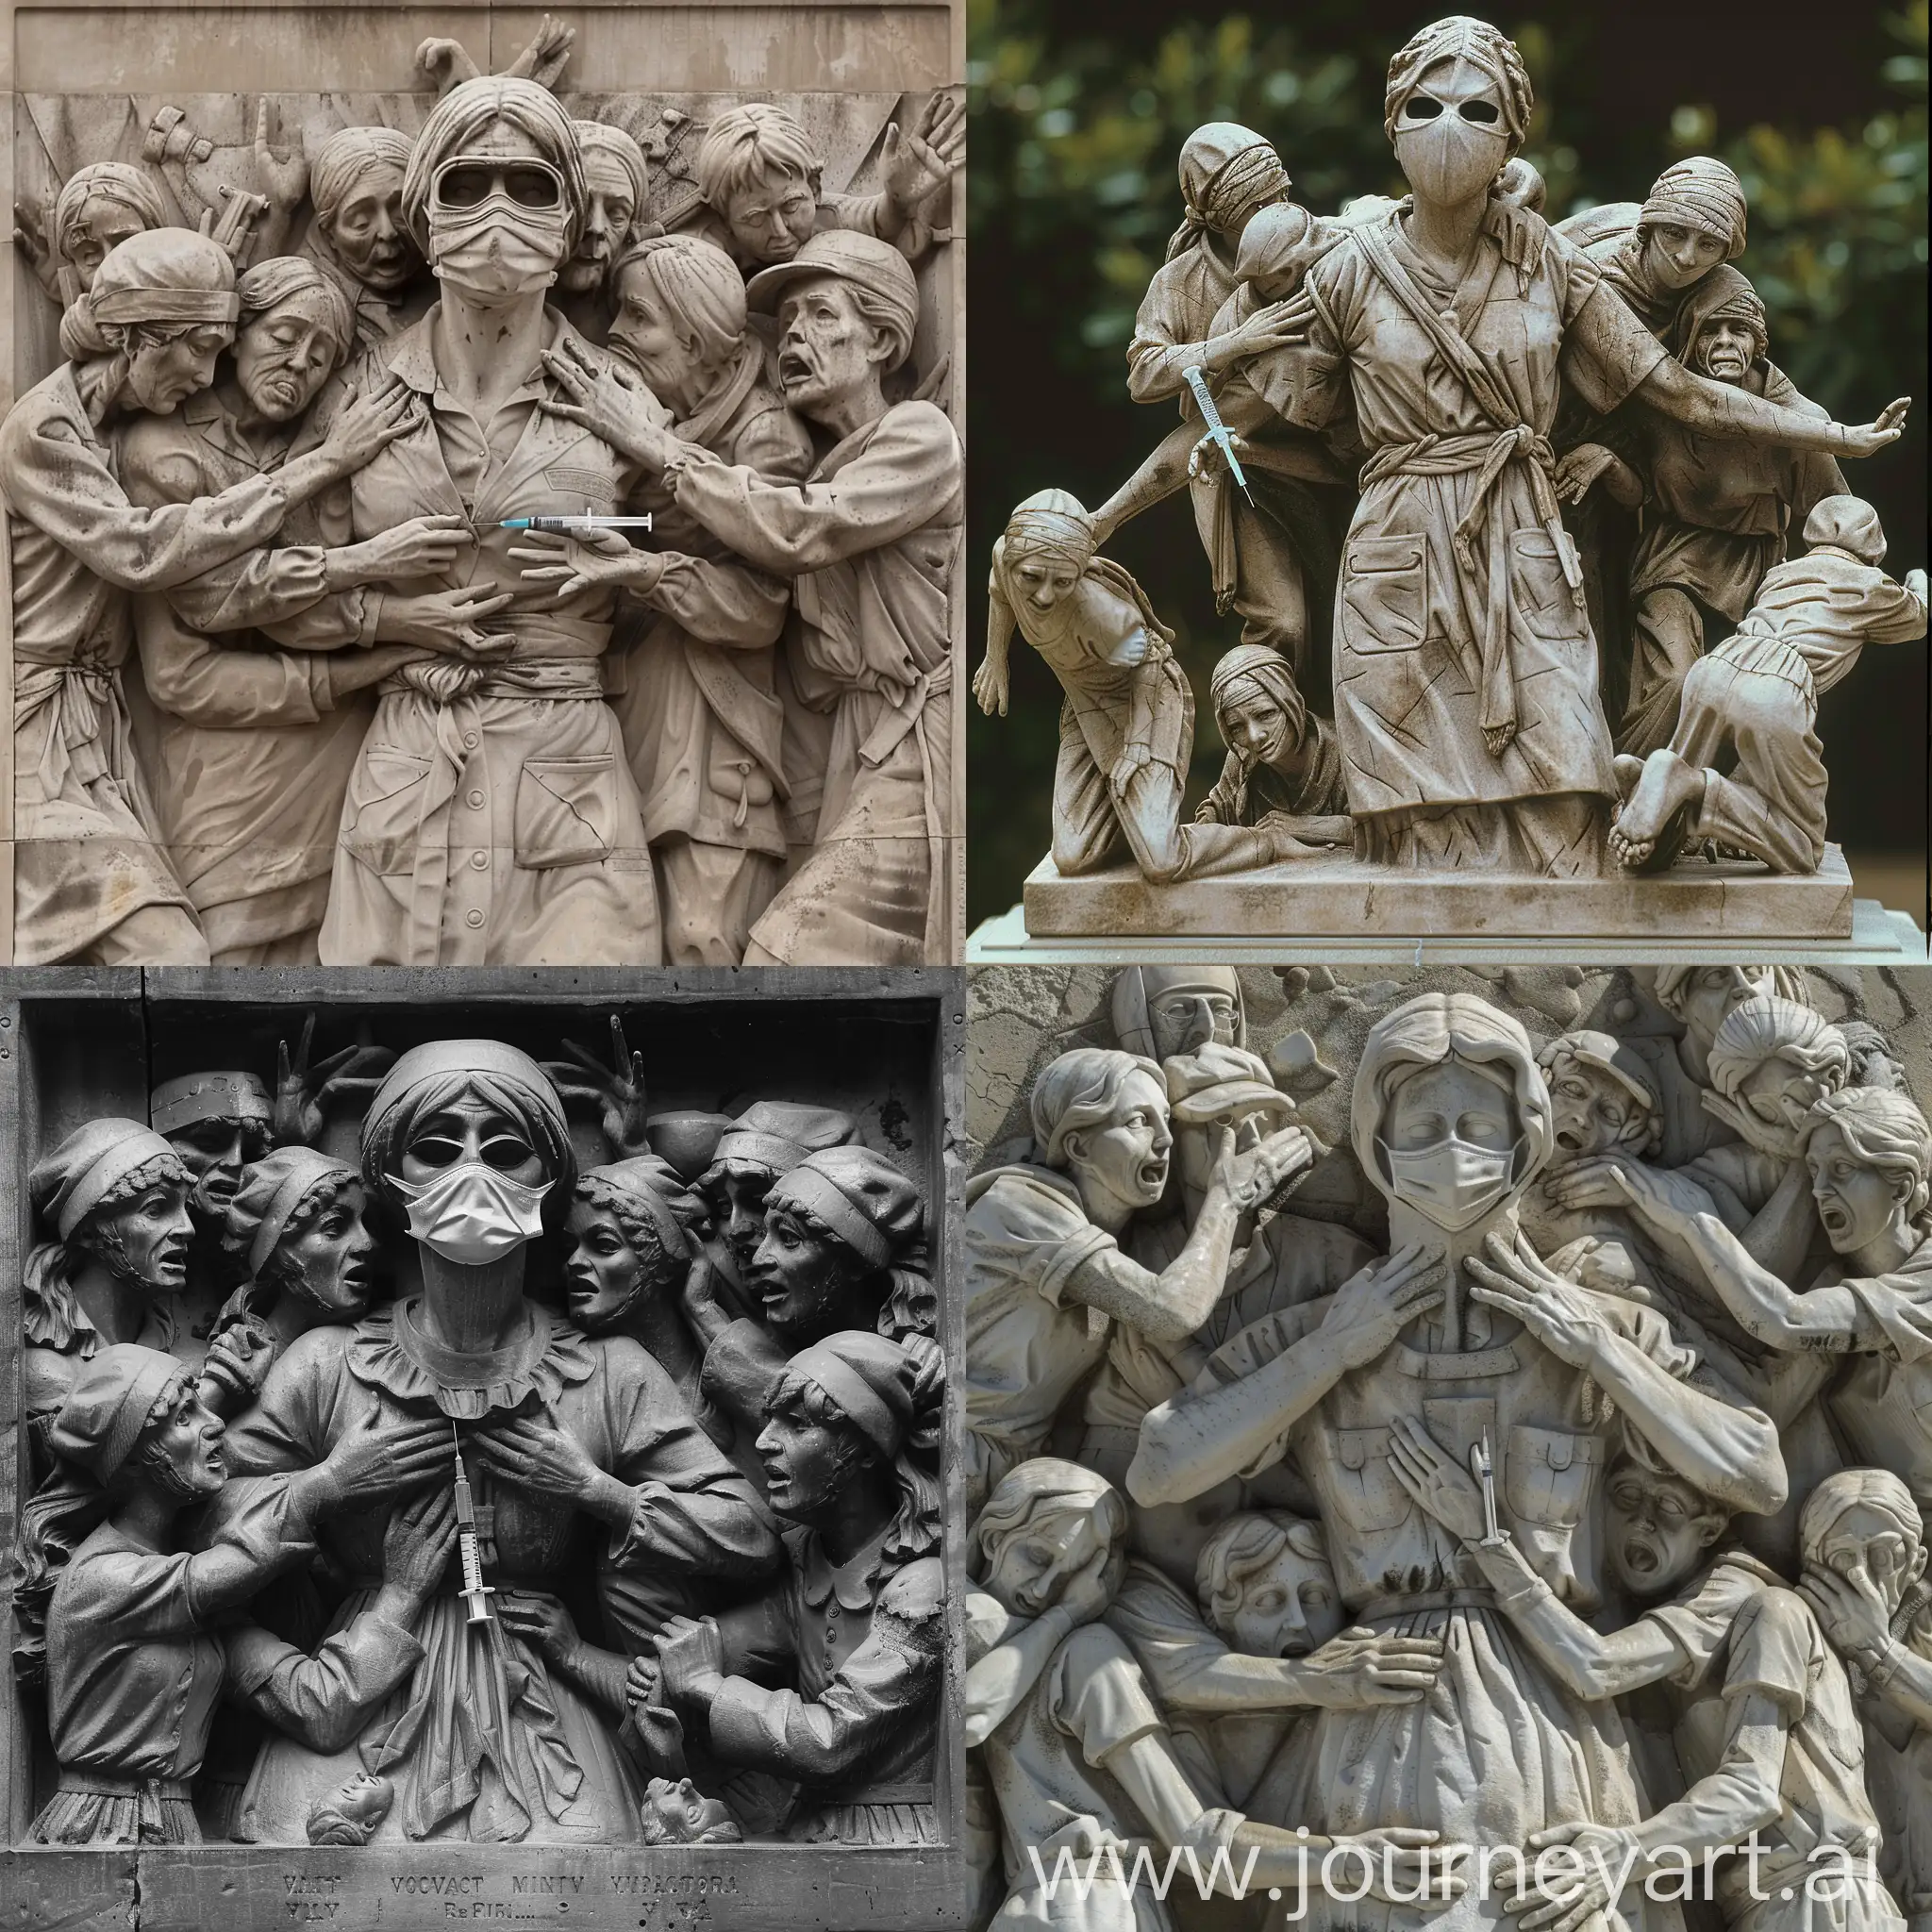 A monument in memory of the victims of vaccination which represents a nurse who has a mask over her eyes and is armed with a syringe, surrounded by pleading victims.